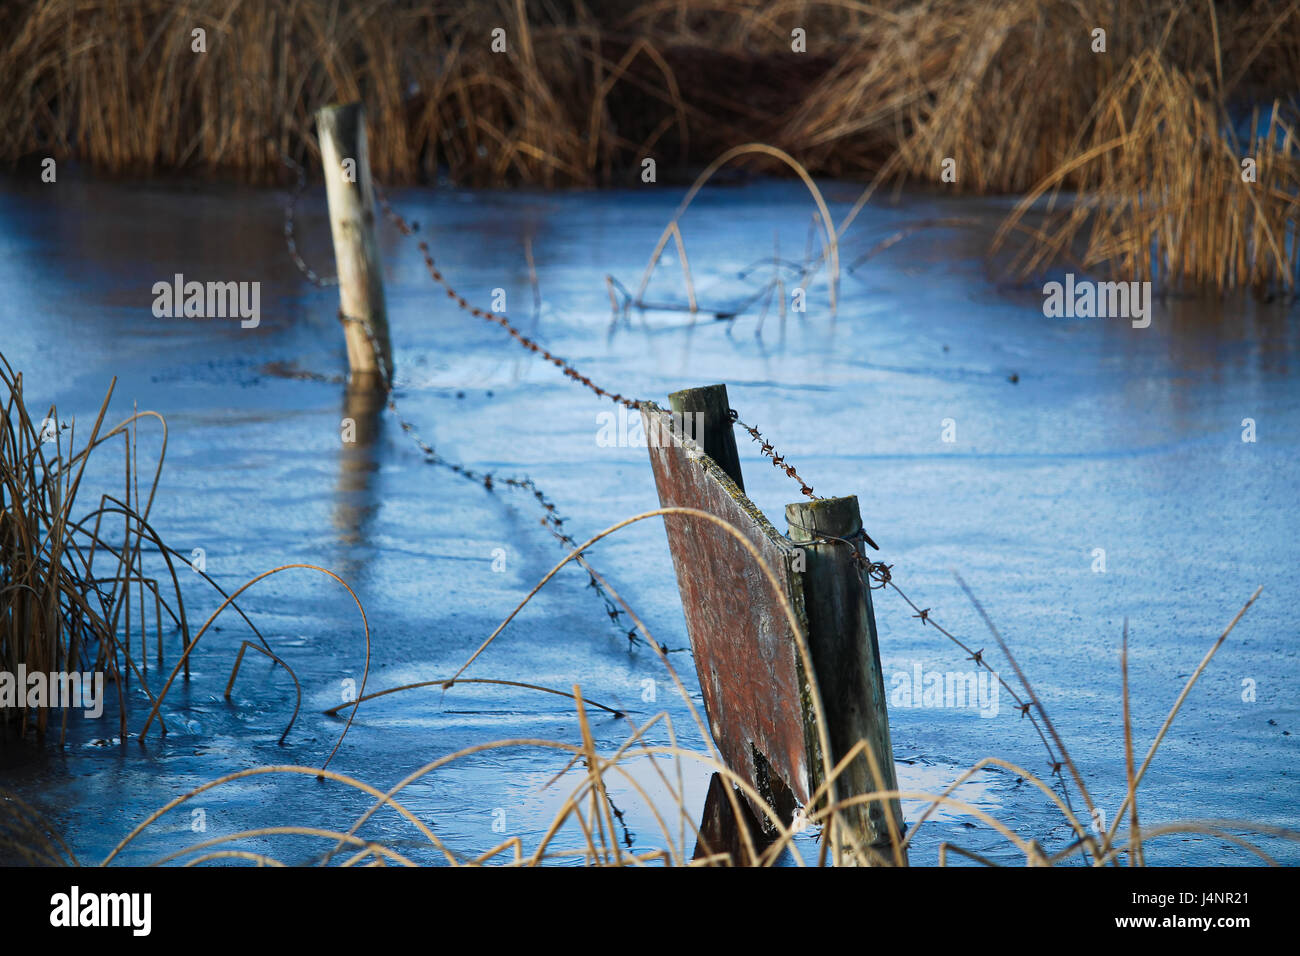 A fence frozen in ice along some rushes. Stock Photo